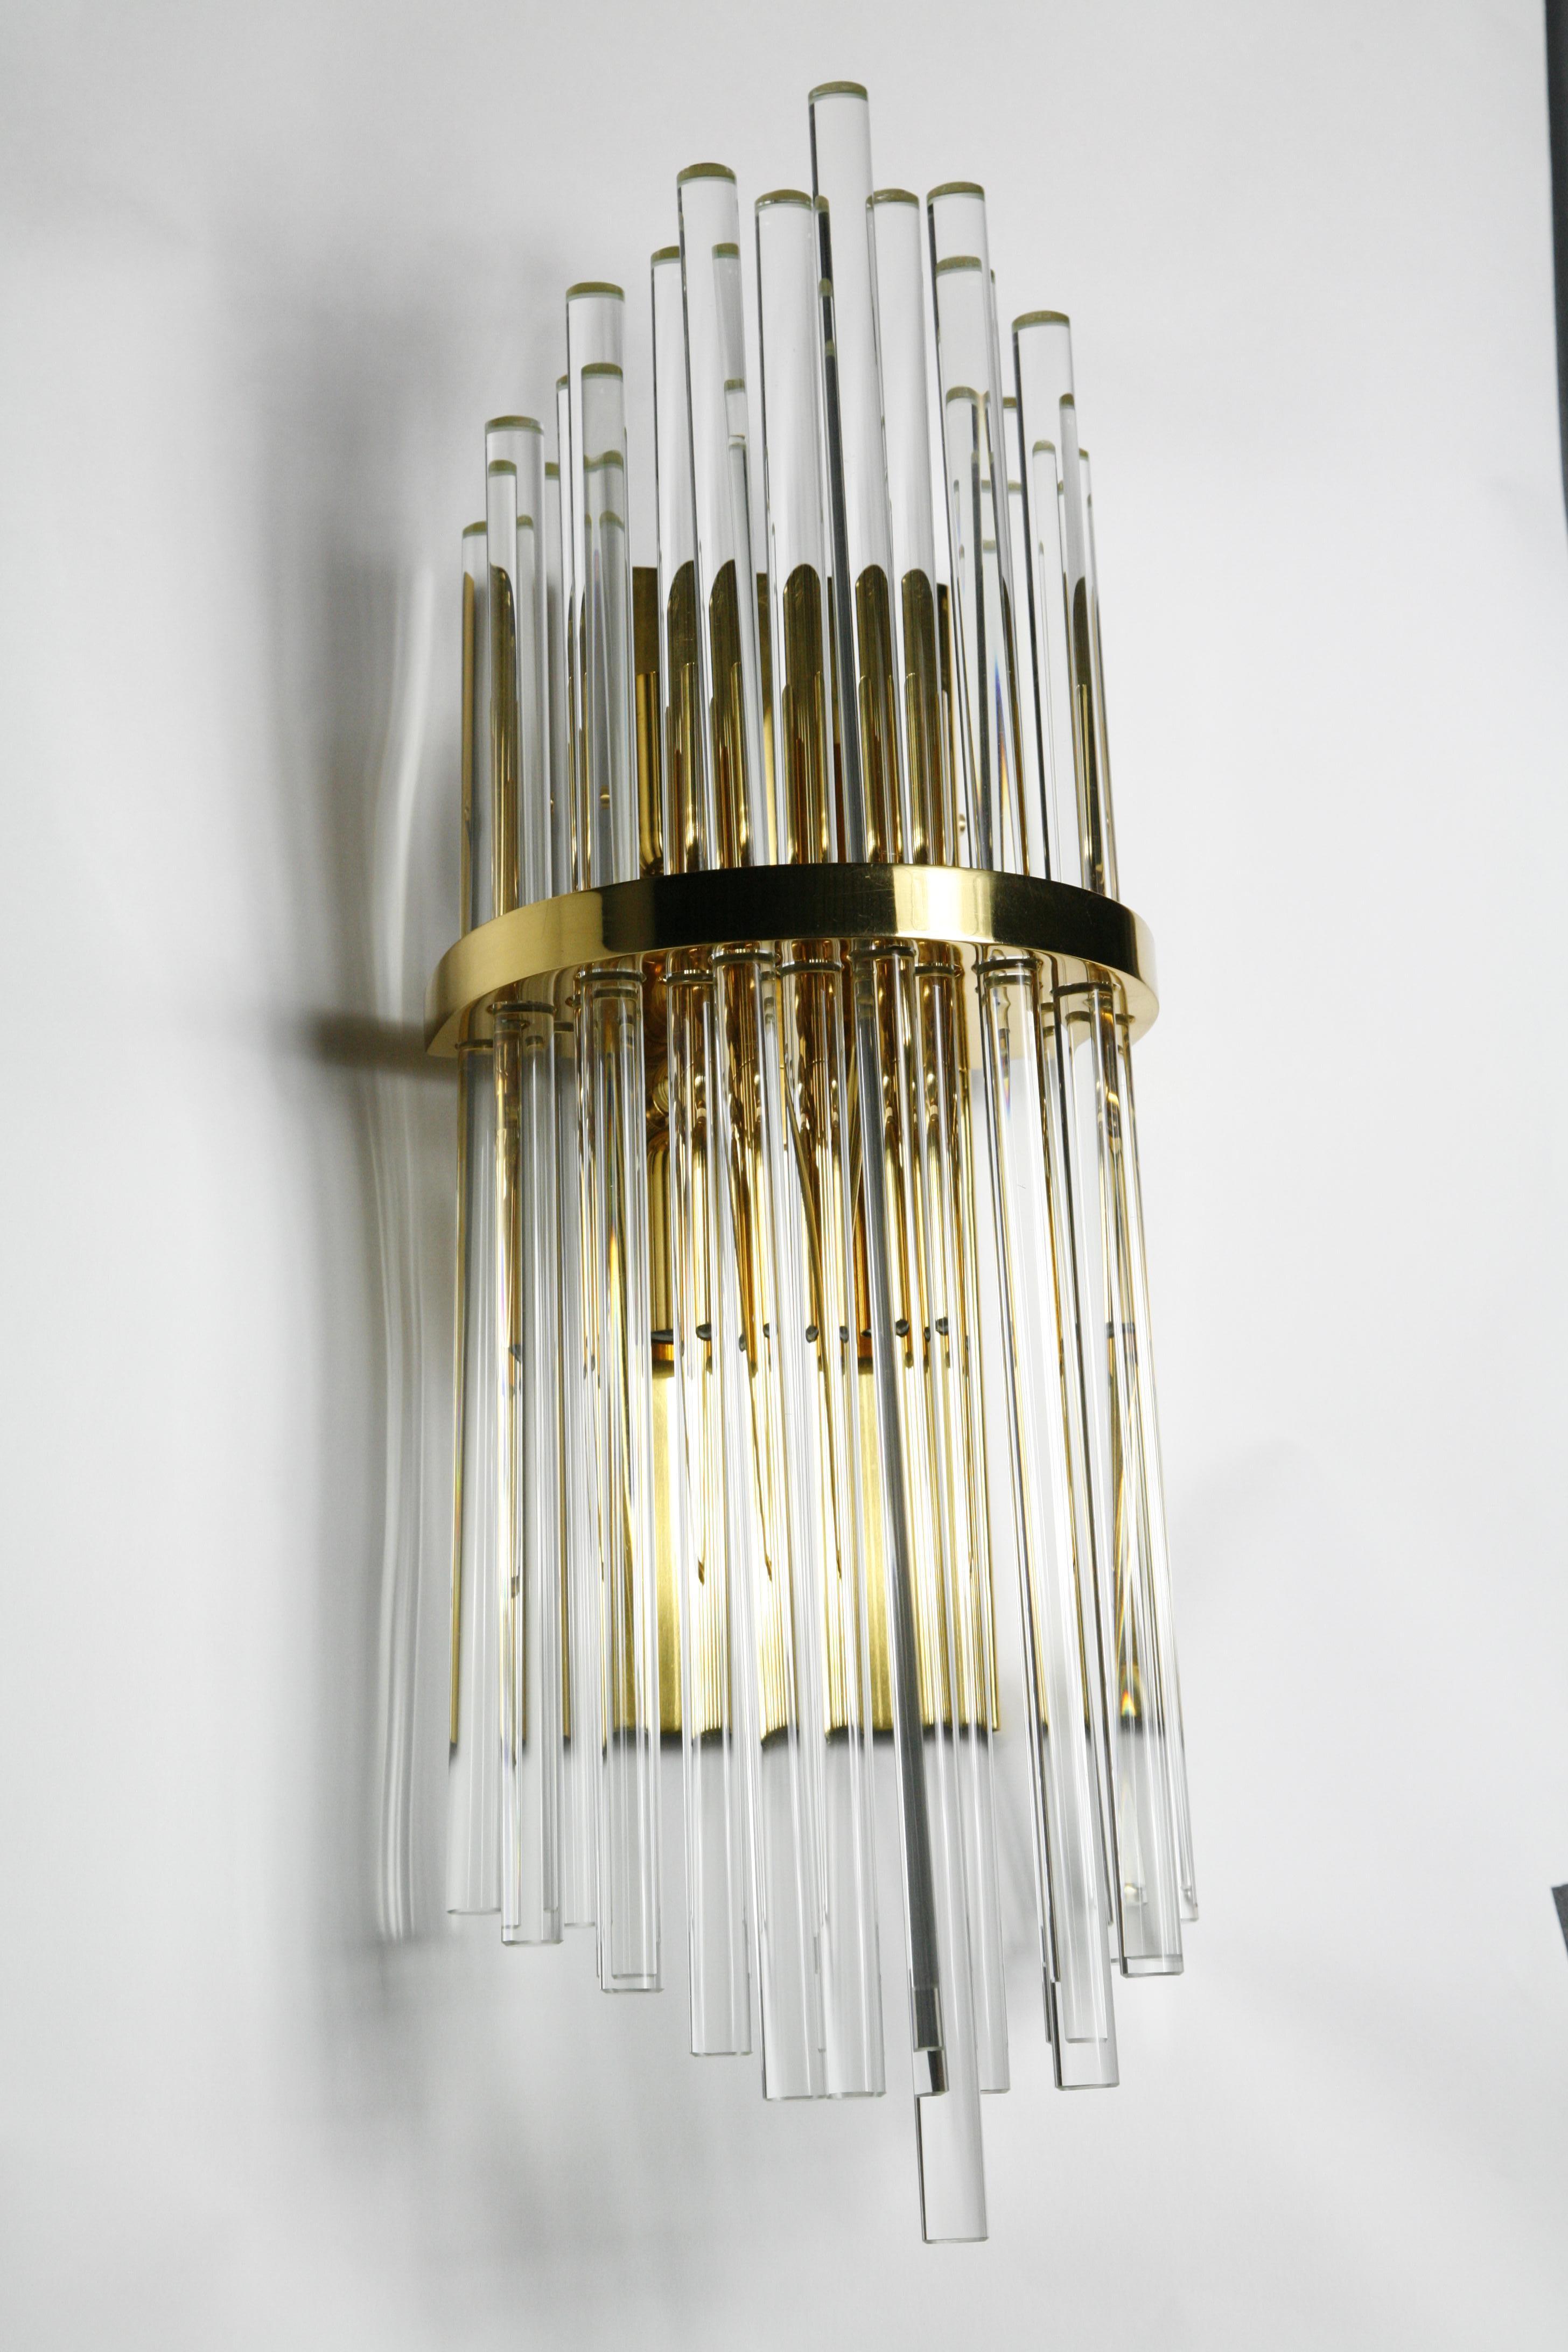 Palwa sconces by Christoph Palme, 1980, Germany
Pair of brass sconces with four European candelabra sockets the shade consist of 17 thick Swarovski crystal rods.
Frames 24-karat gilt in excellent condition, all glass rods are in excellent